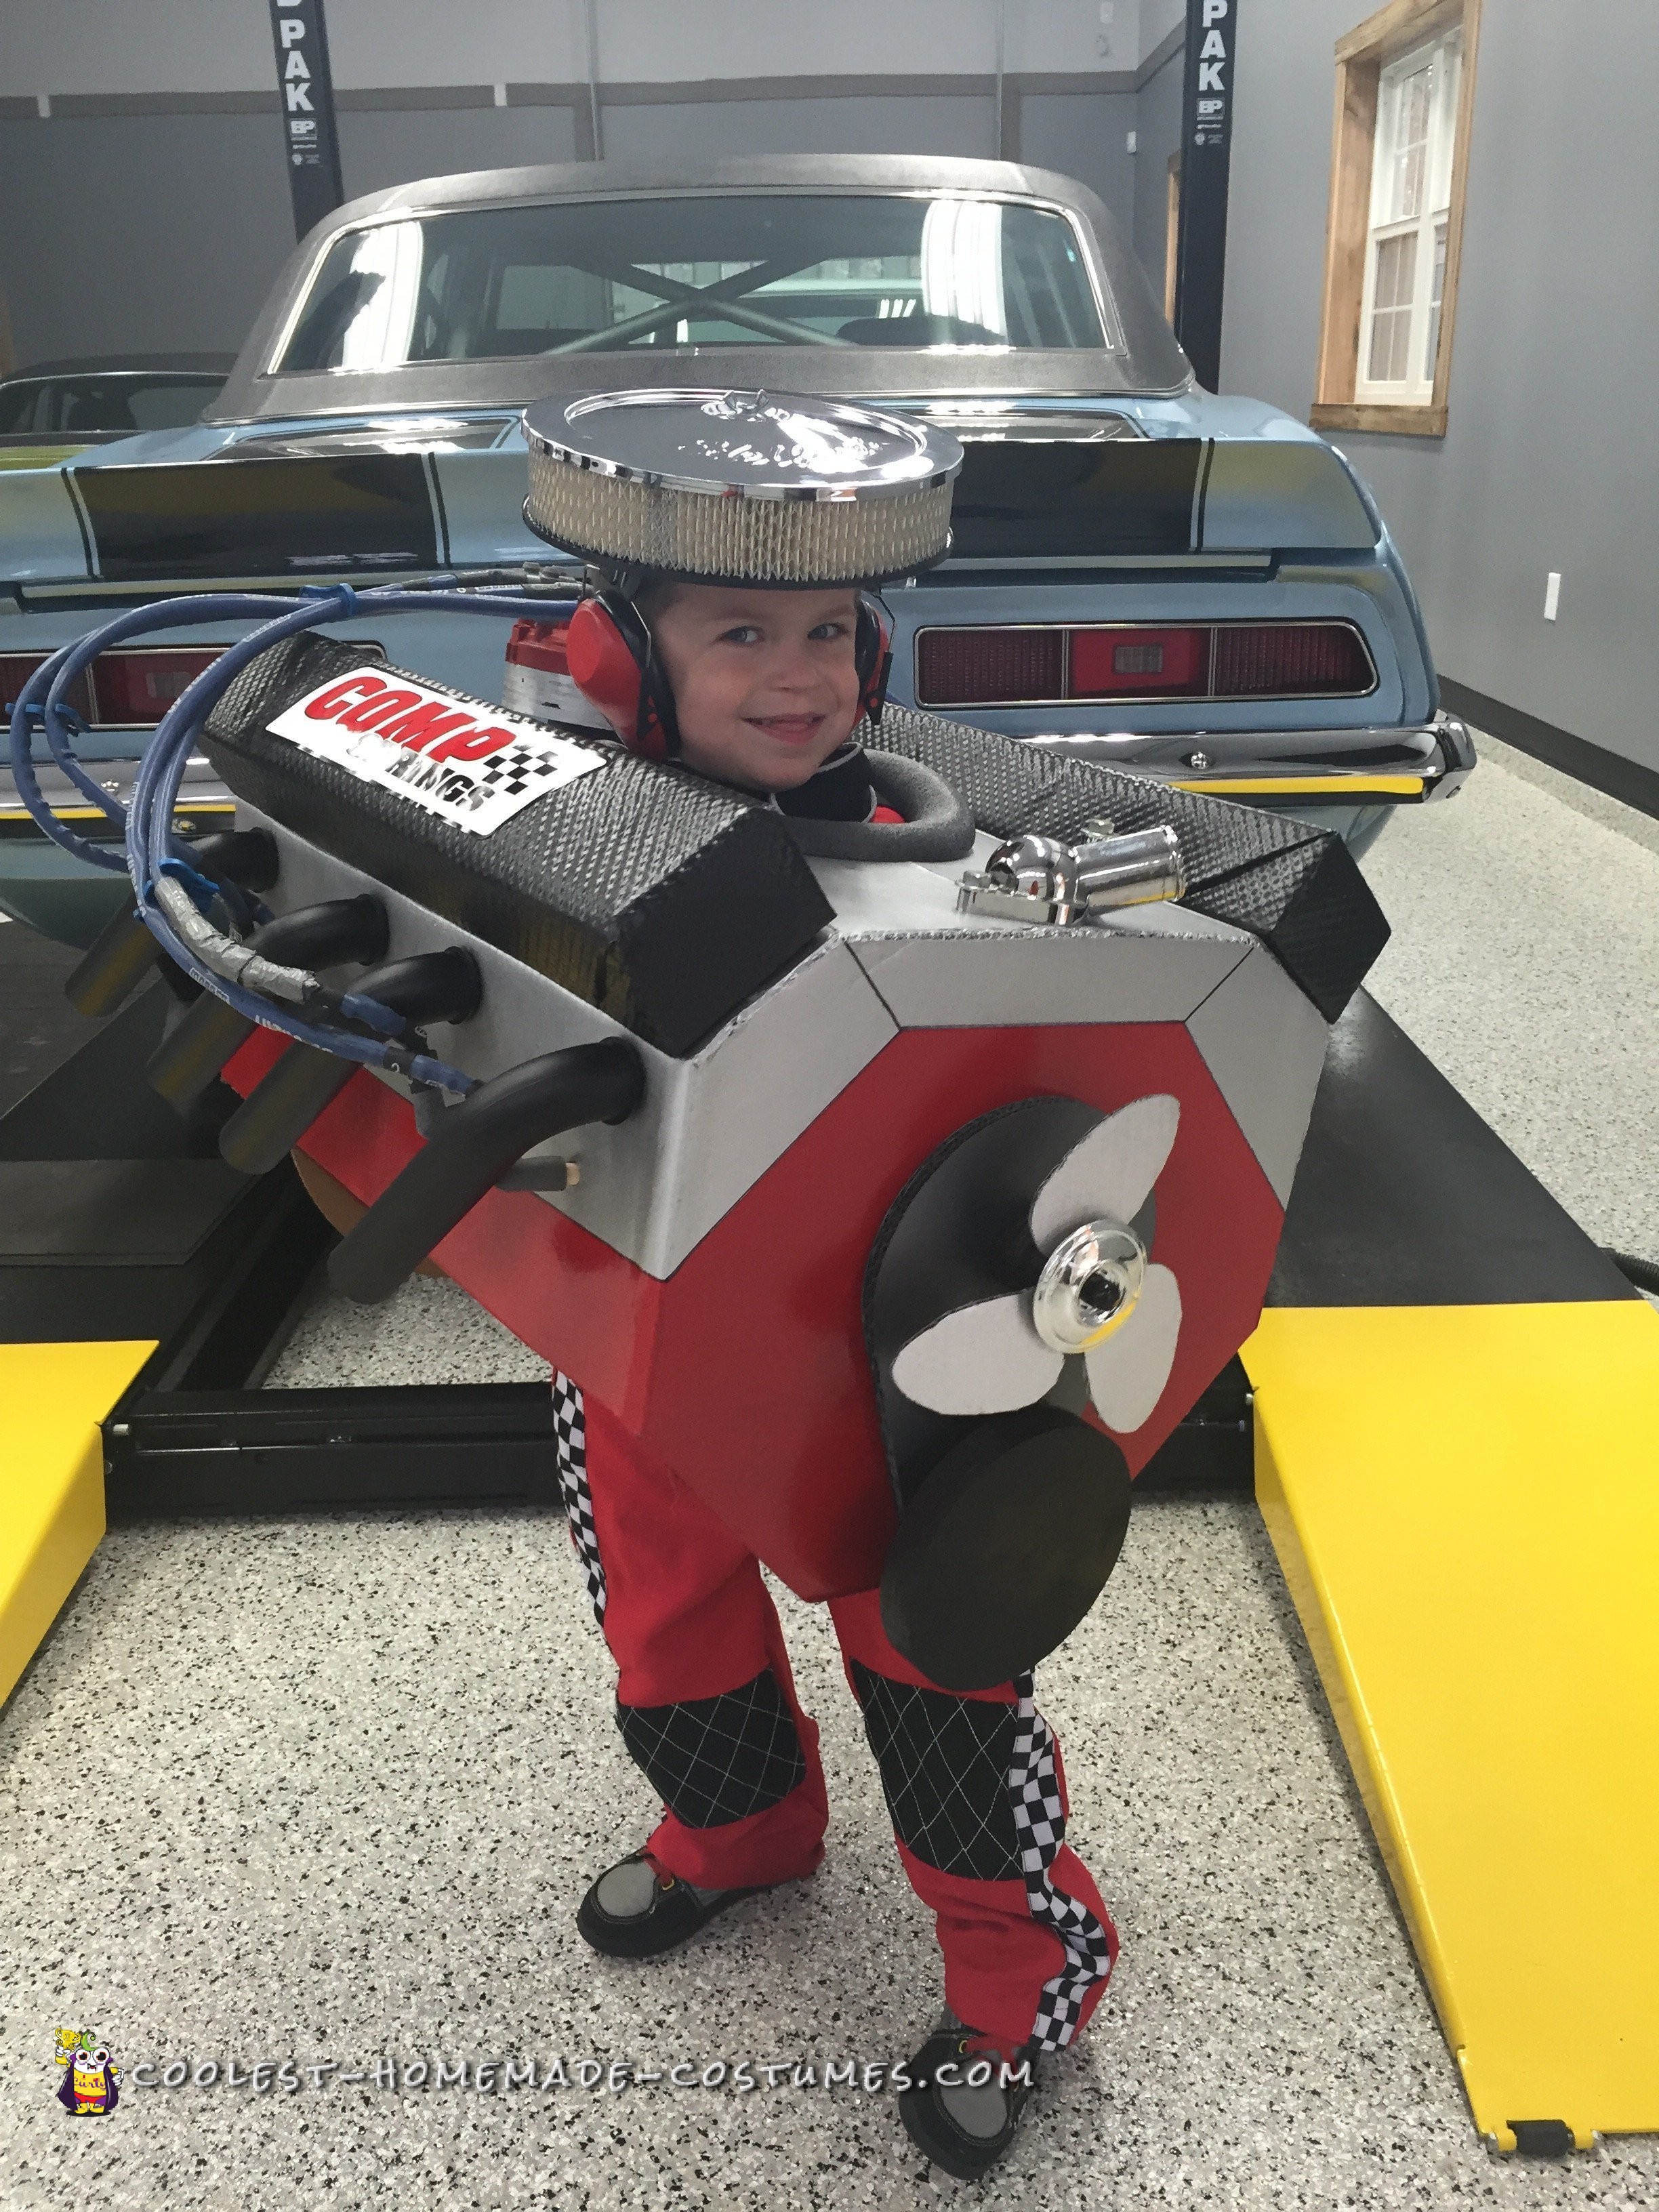 Coolest Small Block Chevy V8 Engine Costume!